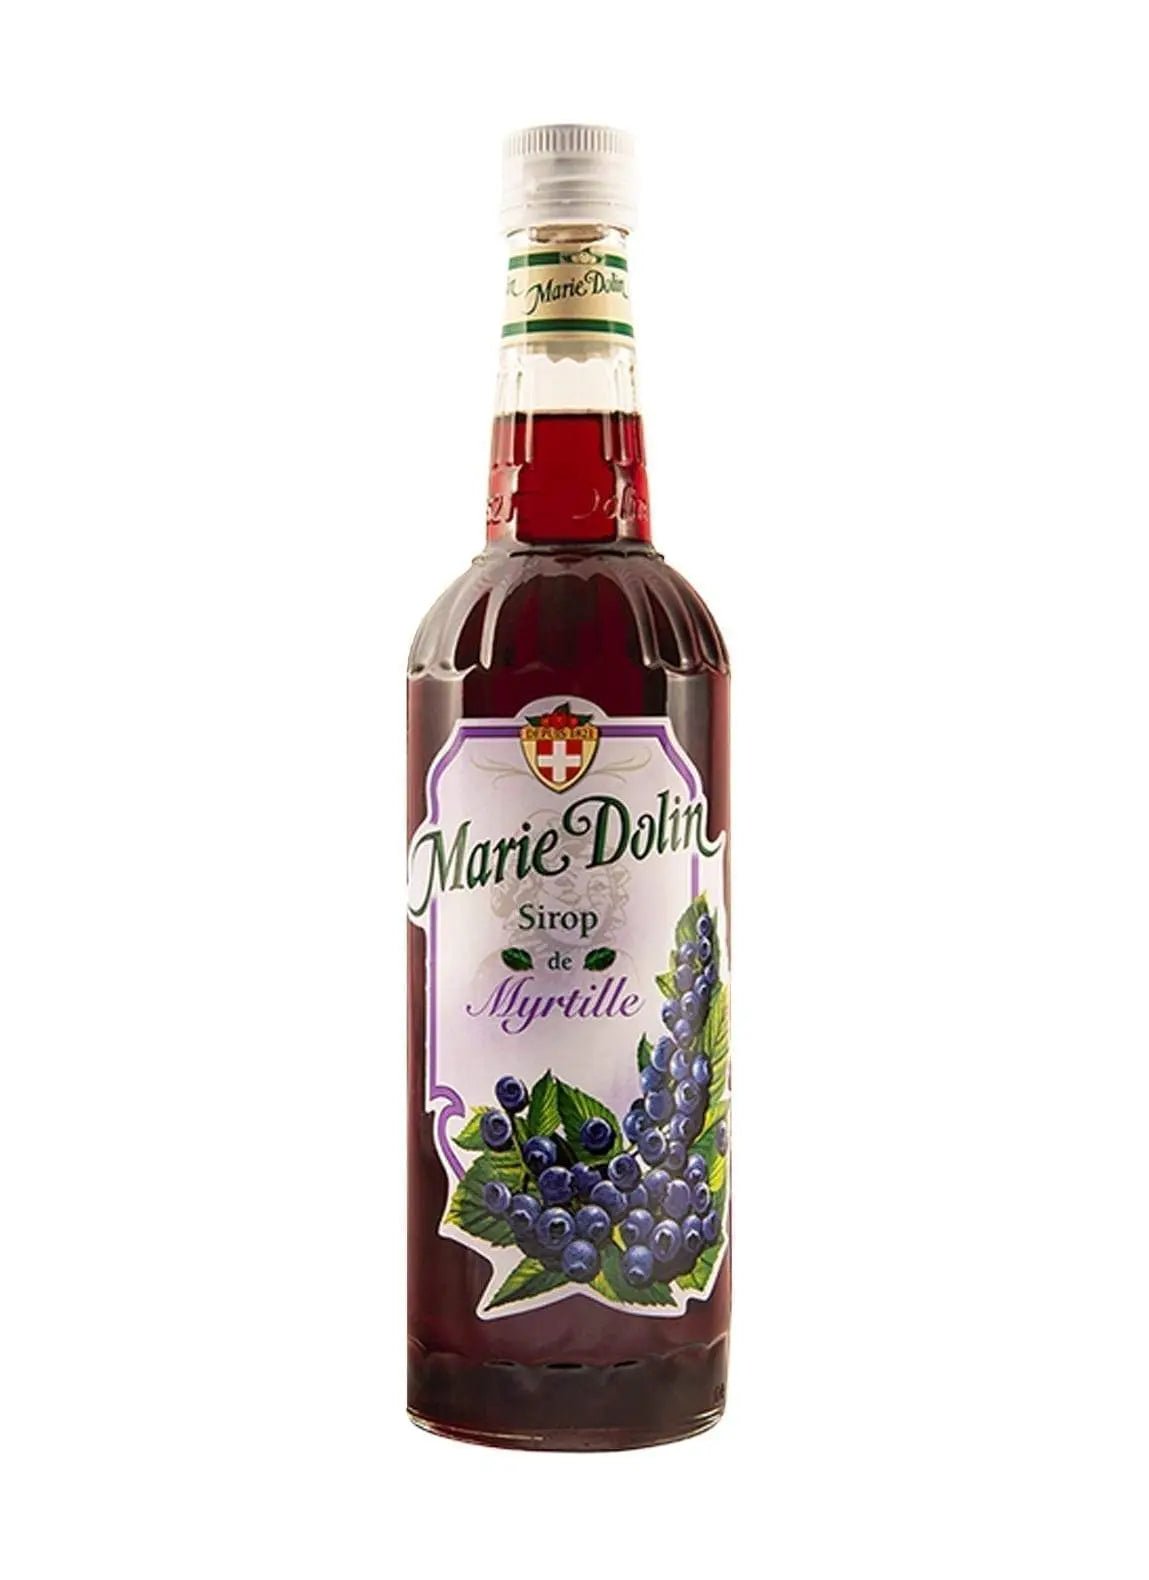 Marie Dolin Sirop de Myrtille (Blueberry) Syrup 700ml - Syrup - Liquor Wine Cave